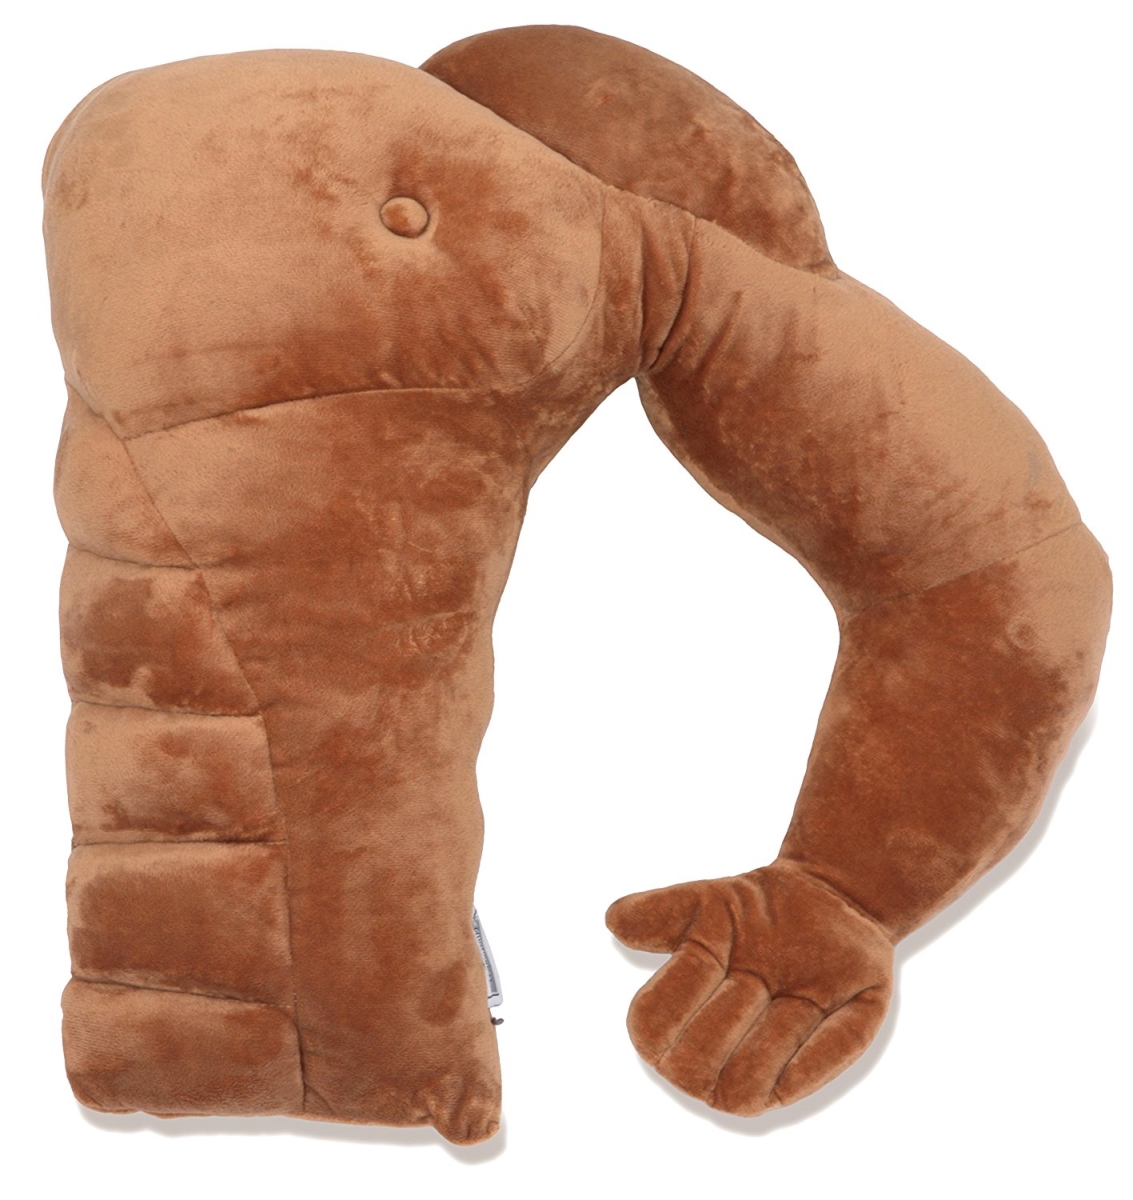 Picture of Living Health Products BFPB-MUS-MA White Man - Boyfriend Muscle Man Arm Plush Cotton Pillow Brawny & Strong